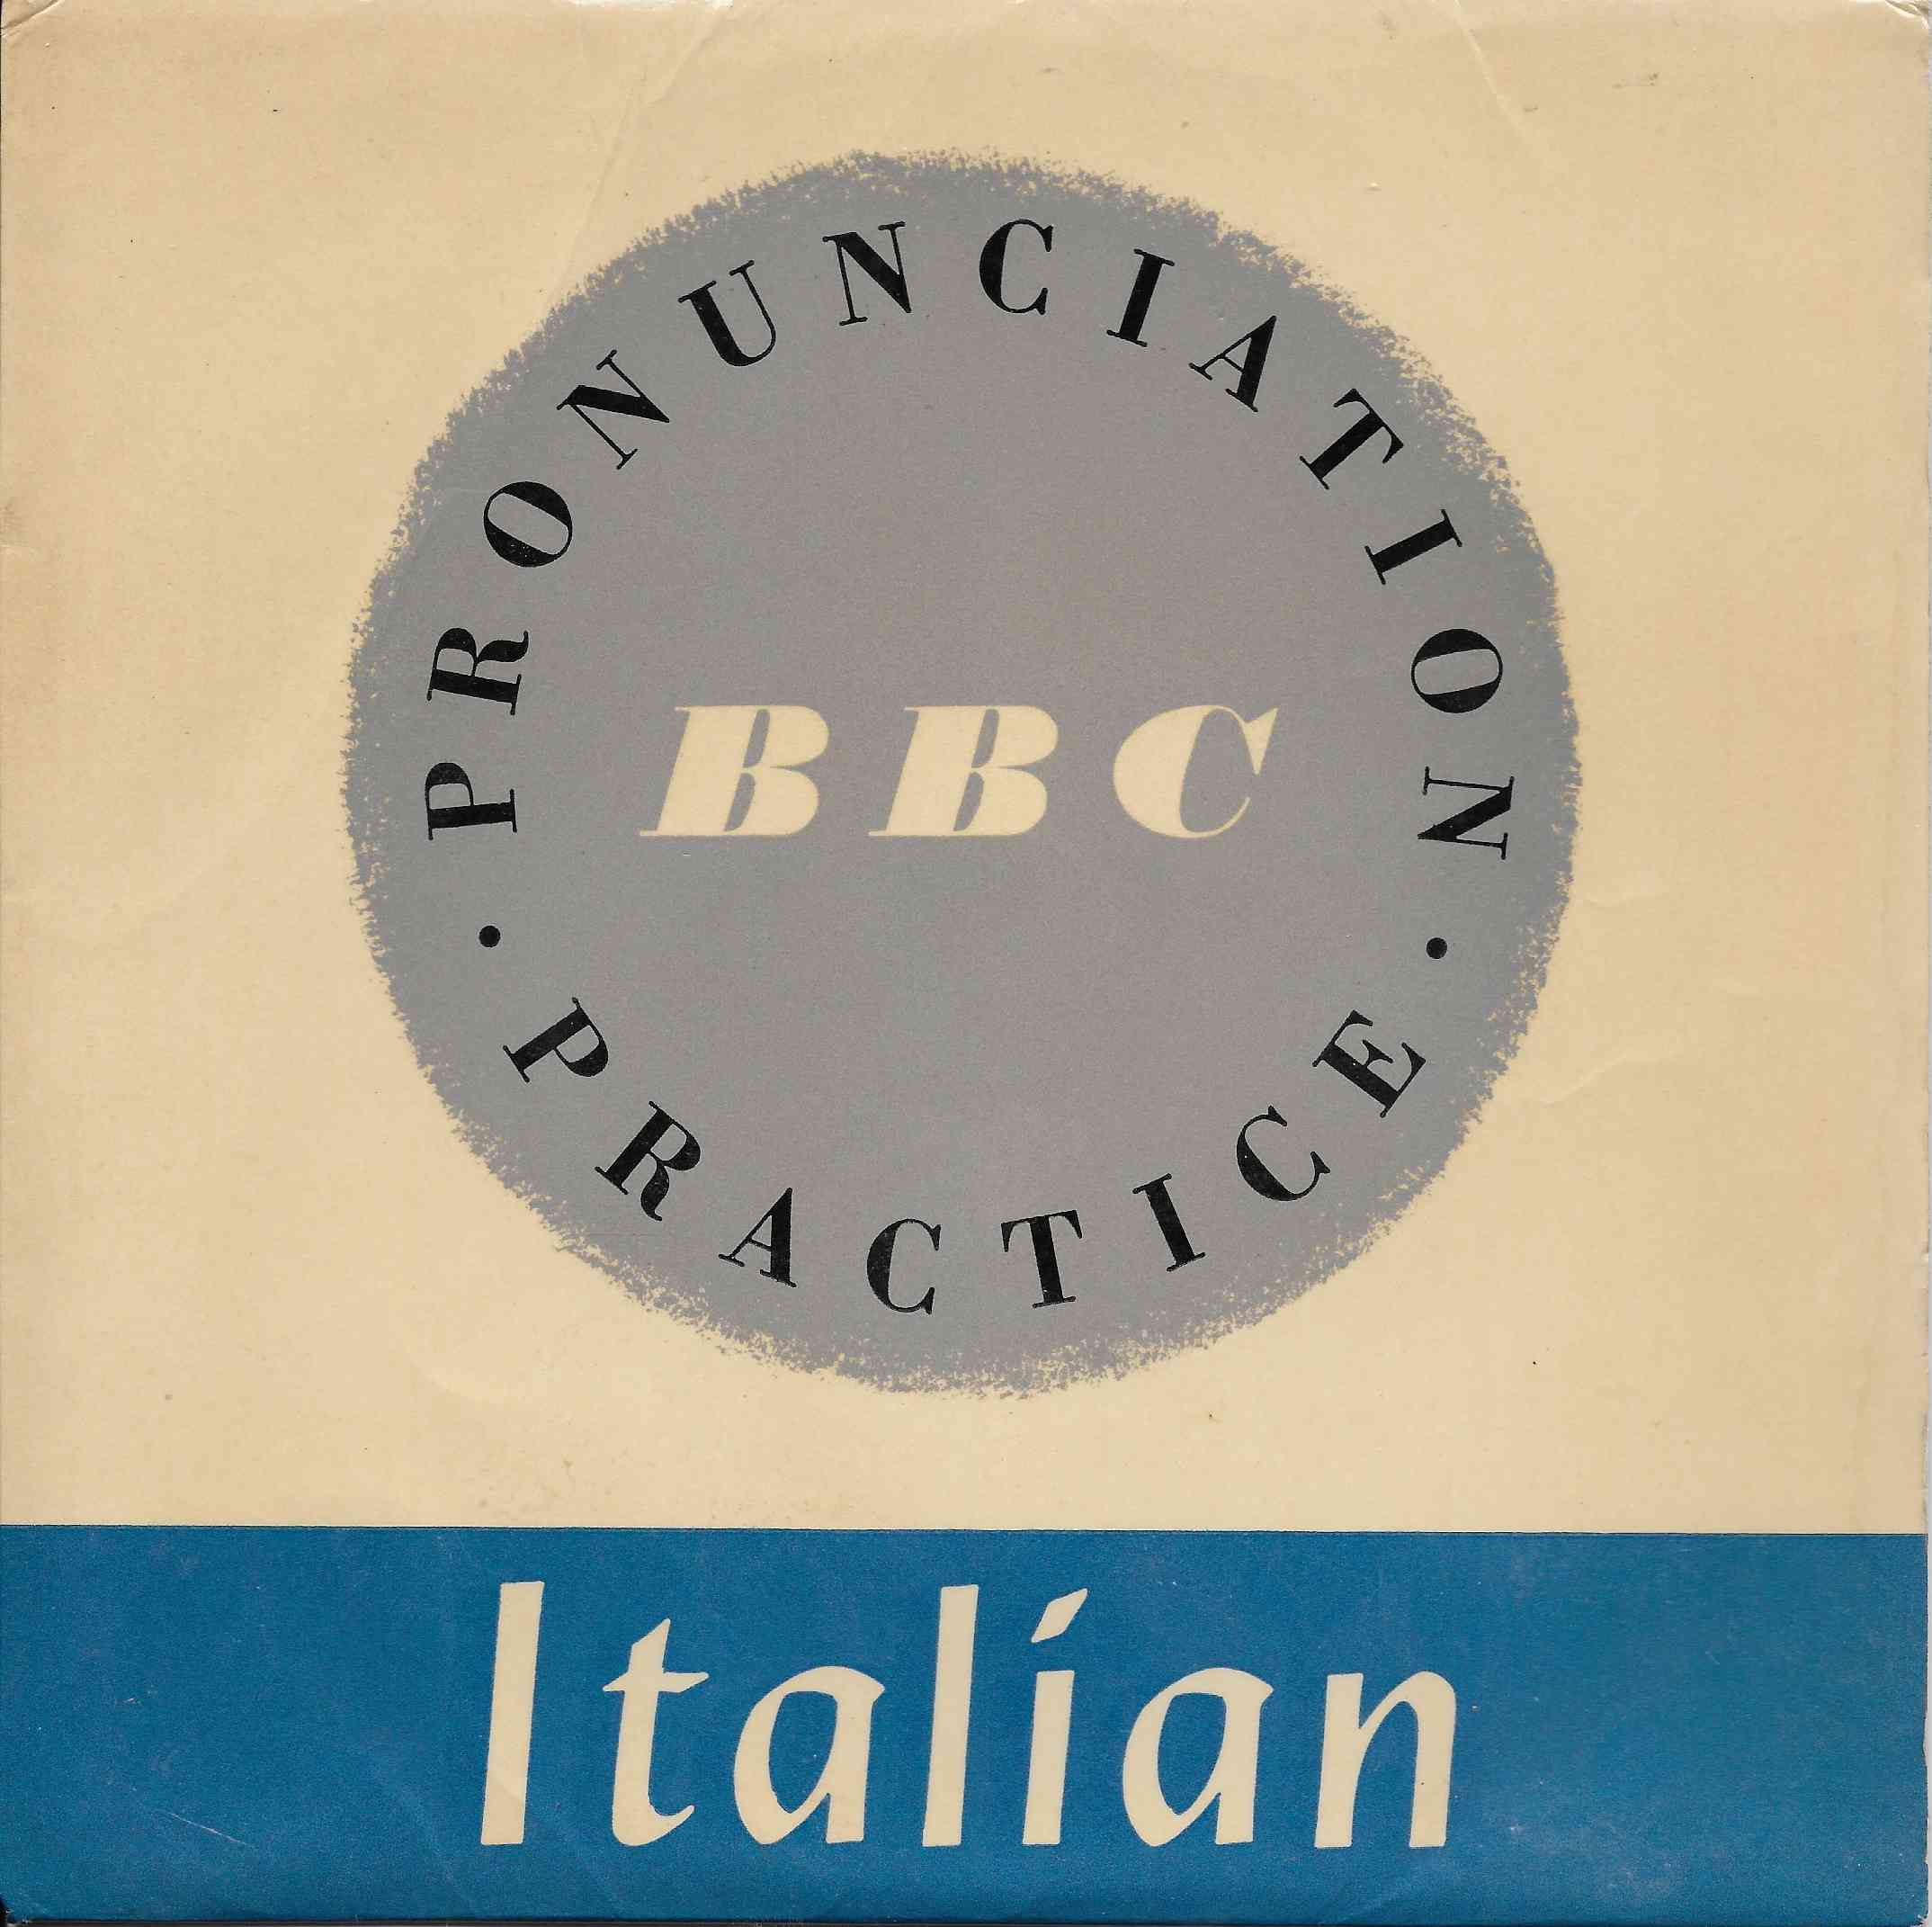 Picture of ITA-A-1 Italian by artist Elsie Ferguson from the BBC singles - Records and Tapes library